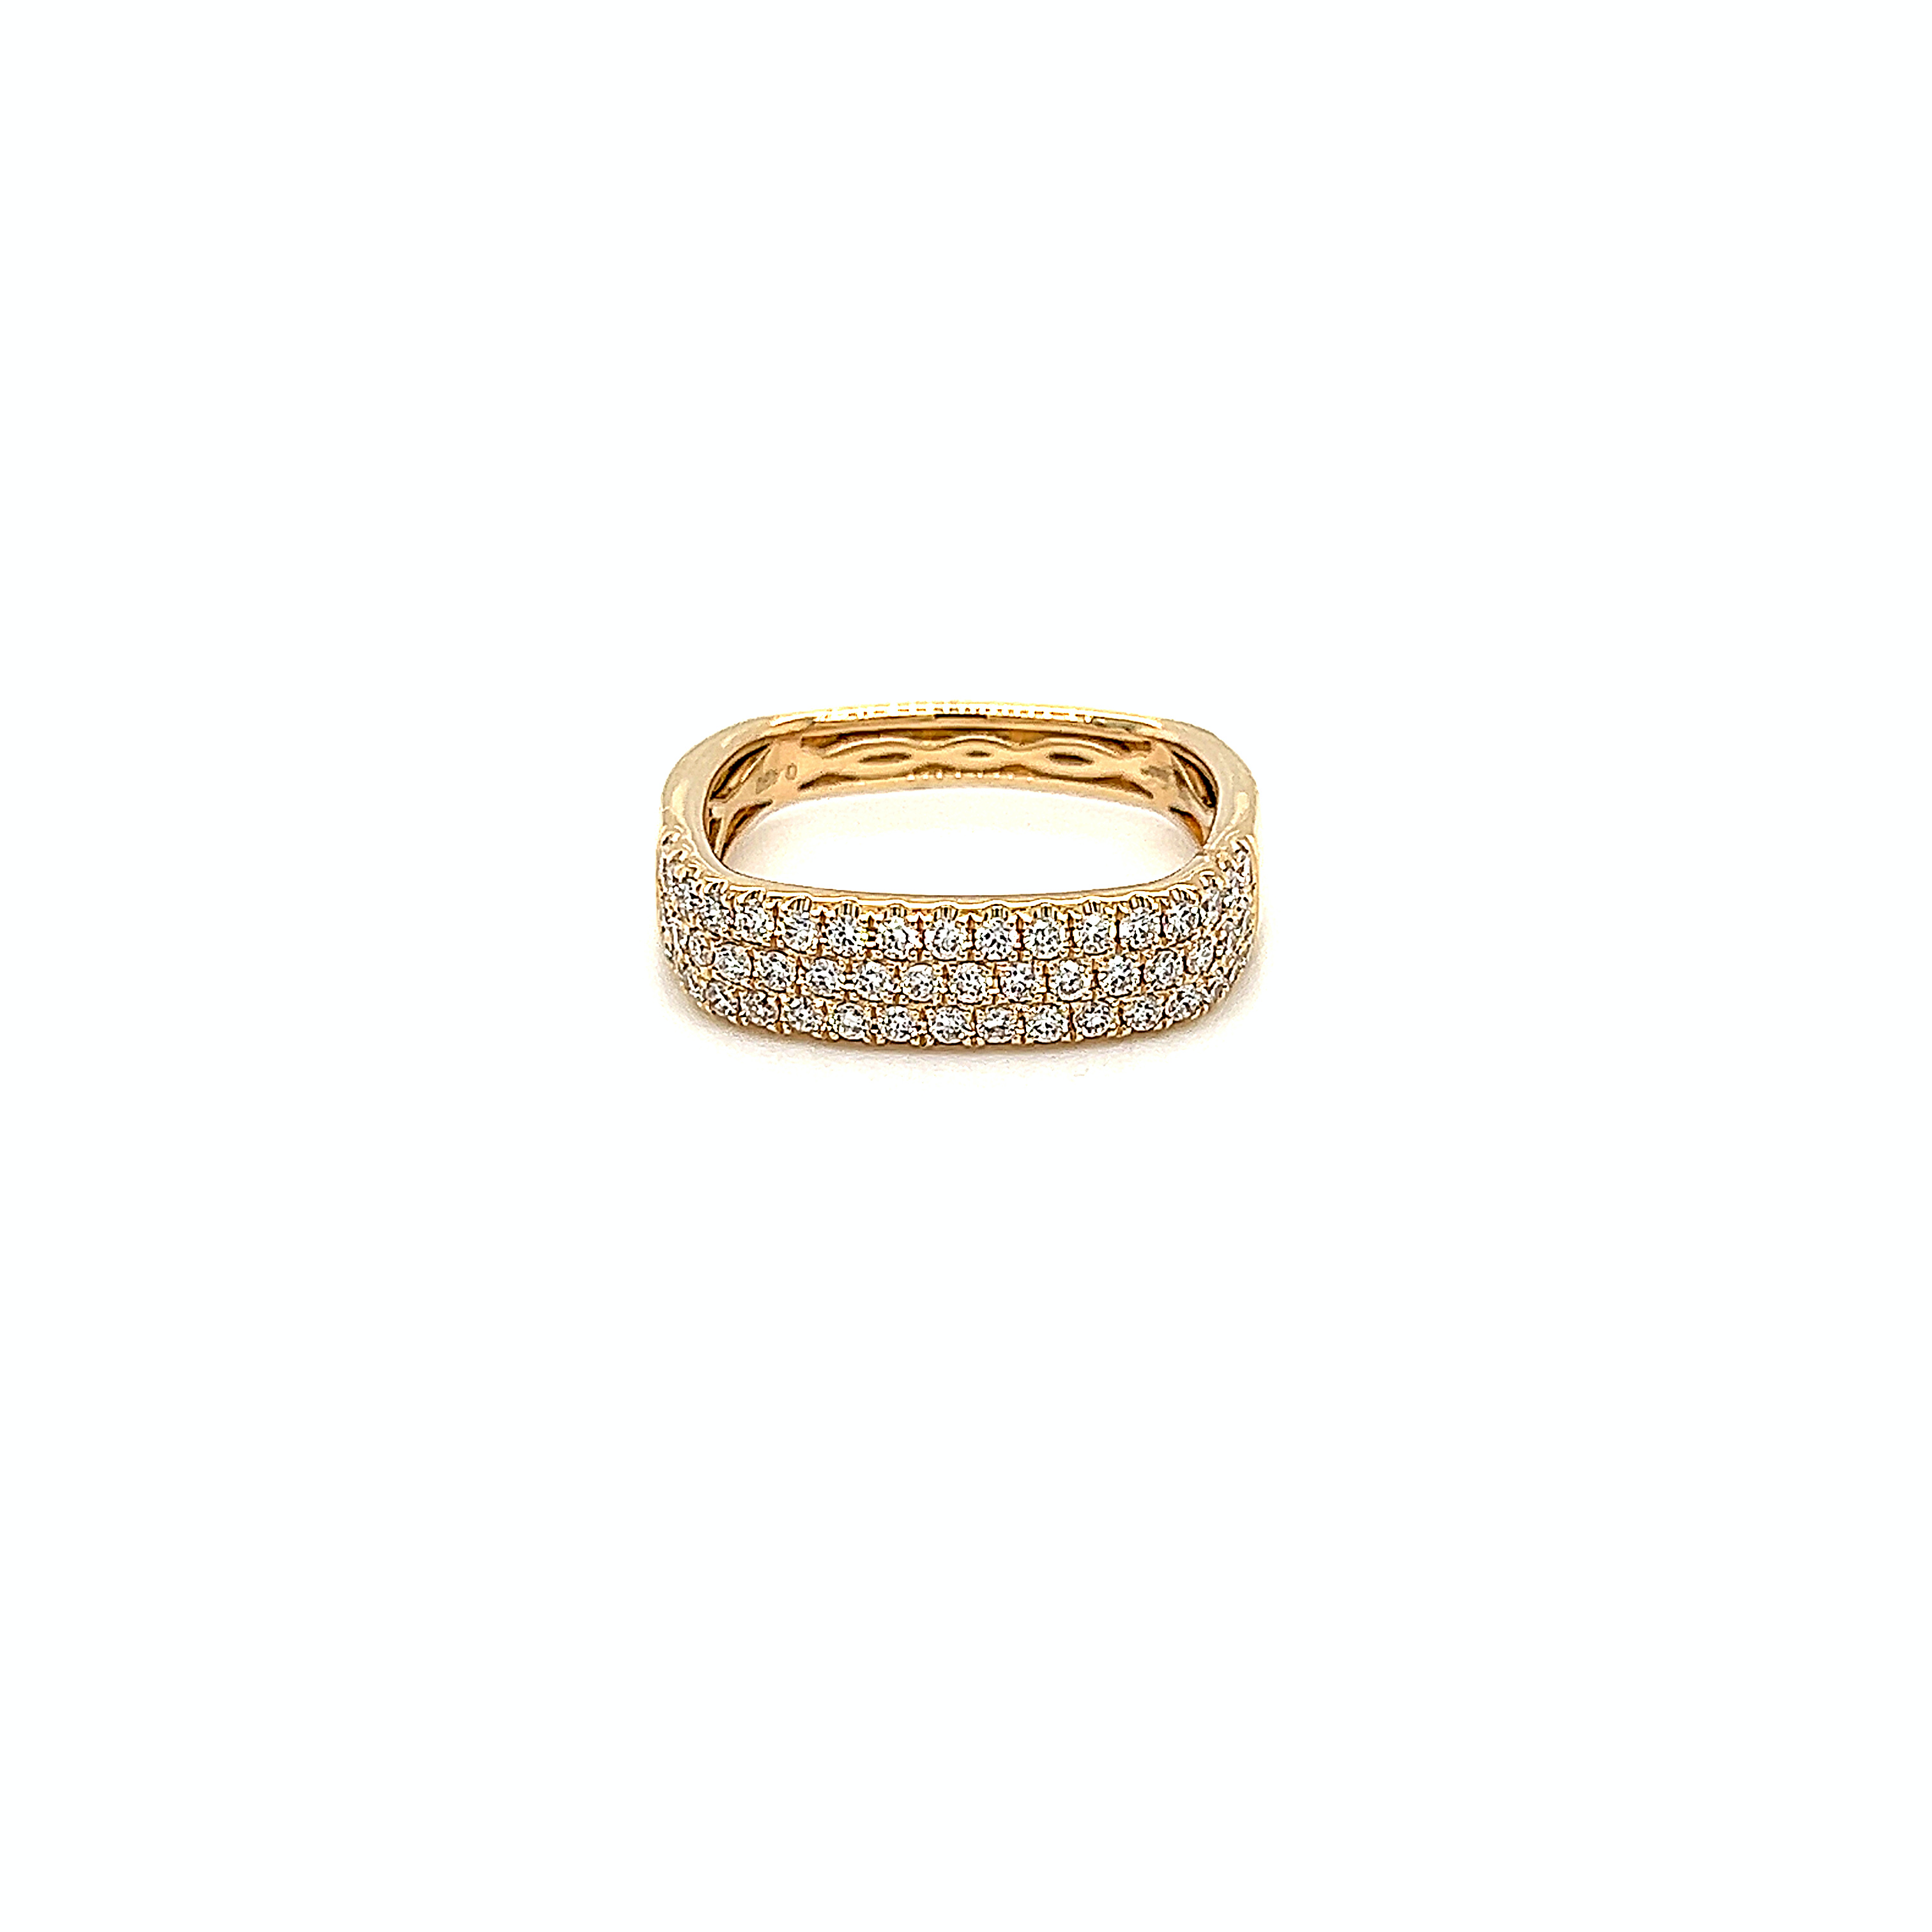 Featured image for “Triple Diamond Row Ring”